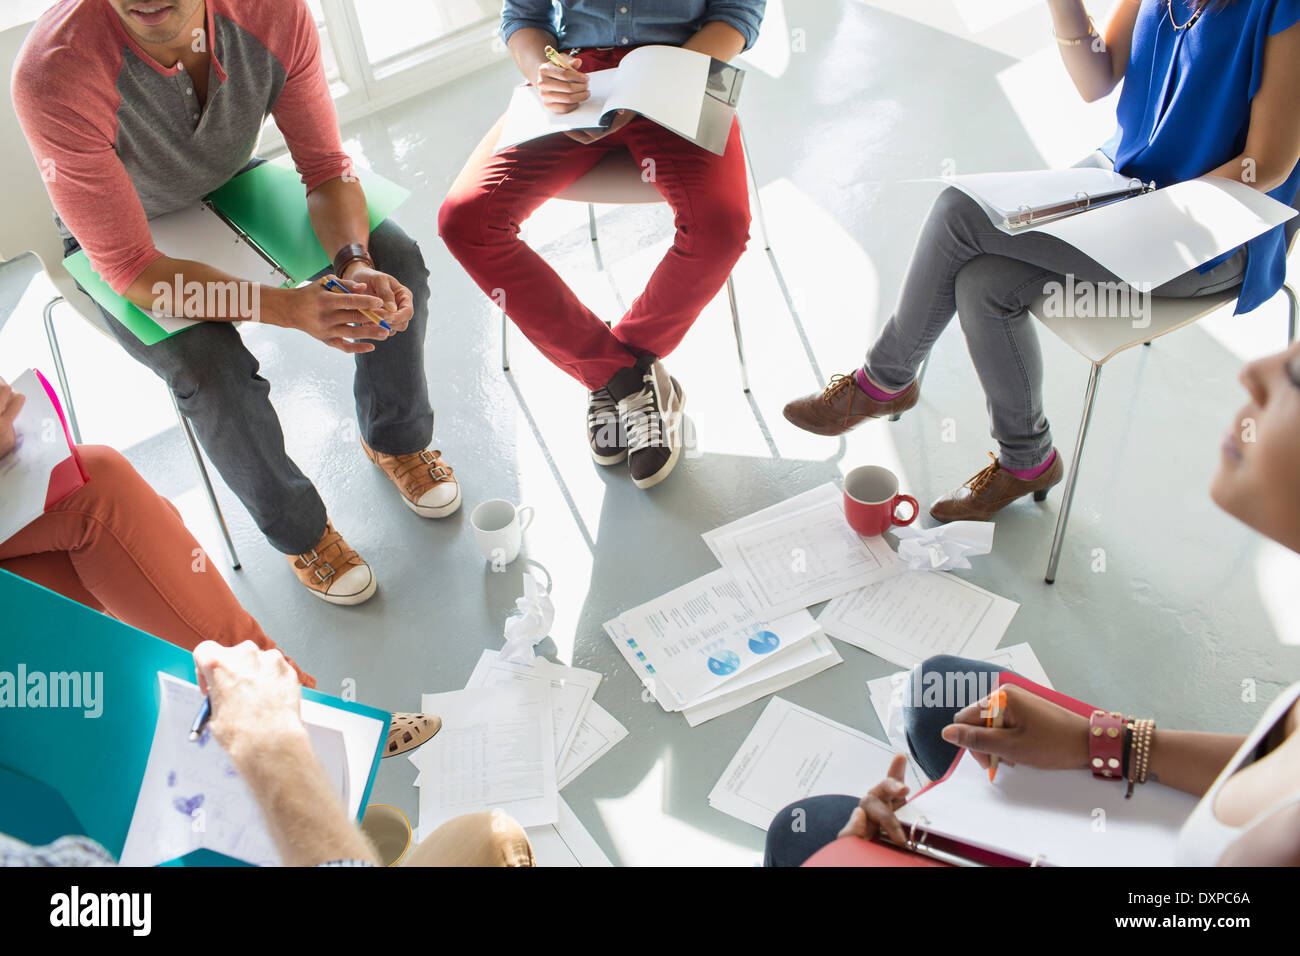 Creative business people meeting with coffee and paperwork in circle of chairs Stock Photo